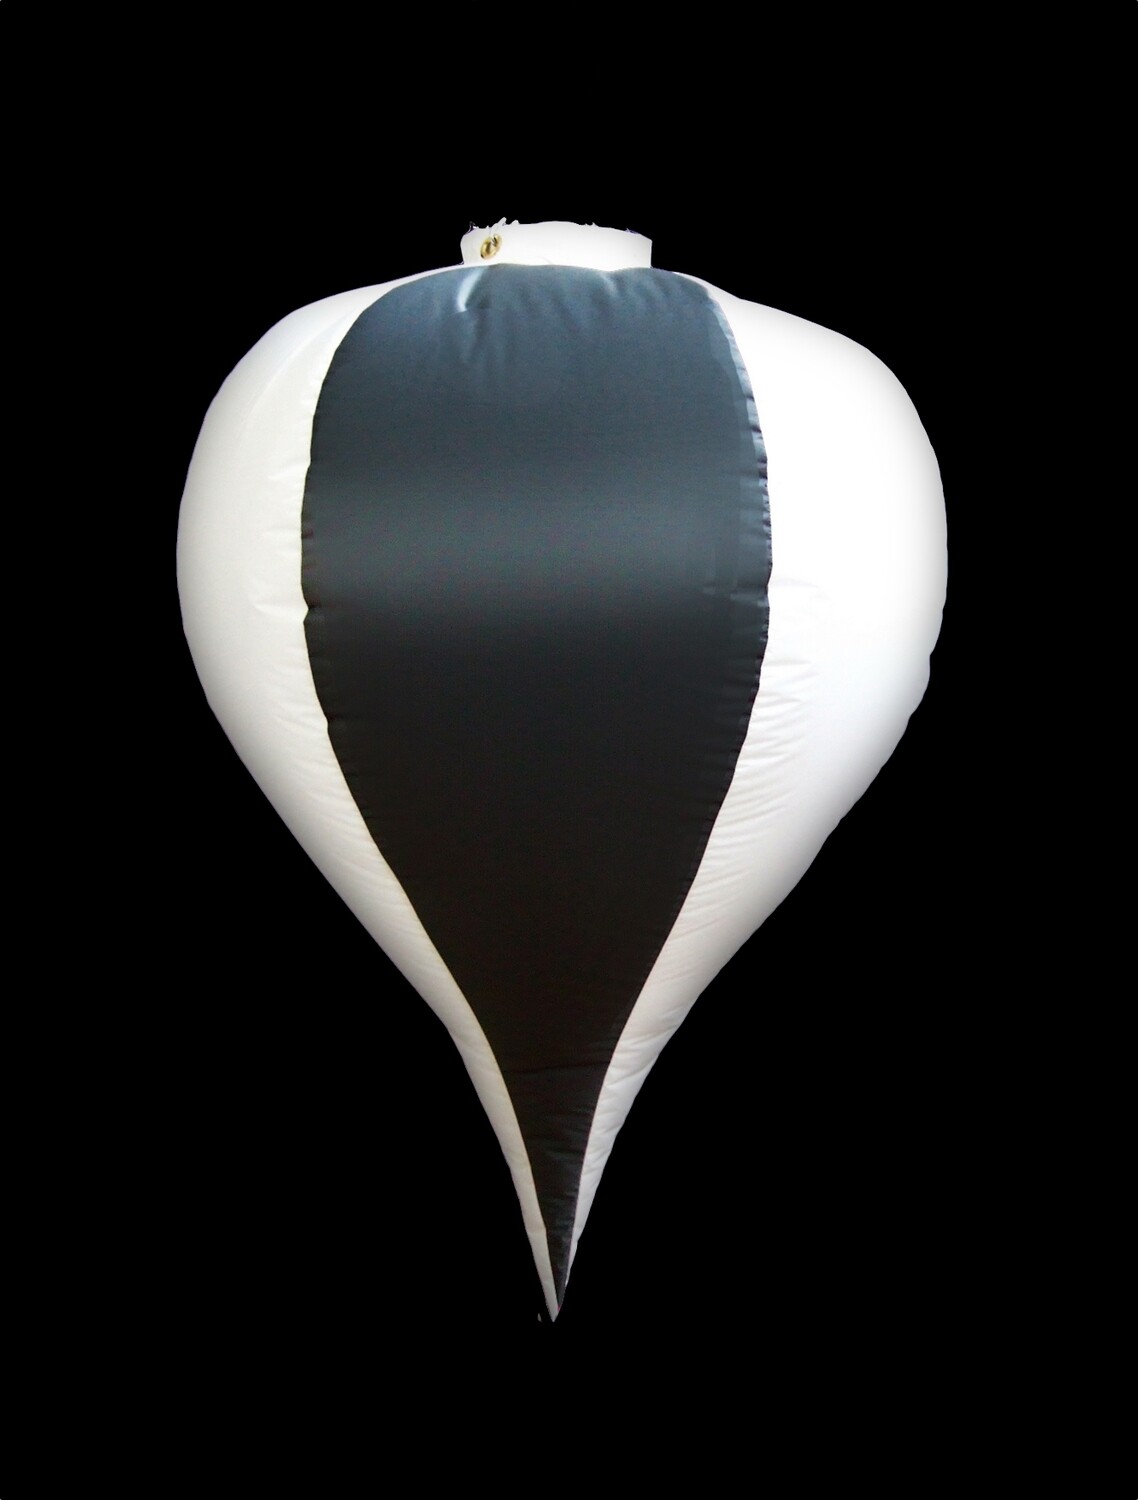 Hanging Inflatable Bauble #1- 2.9ft/89cm x 4ft/122cm